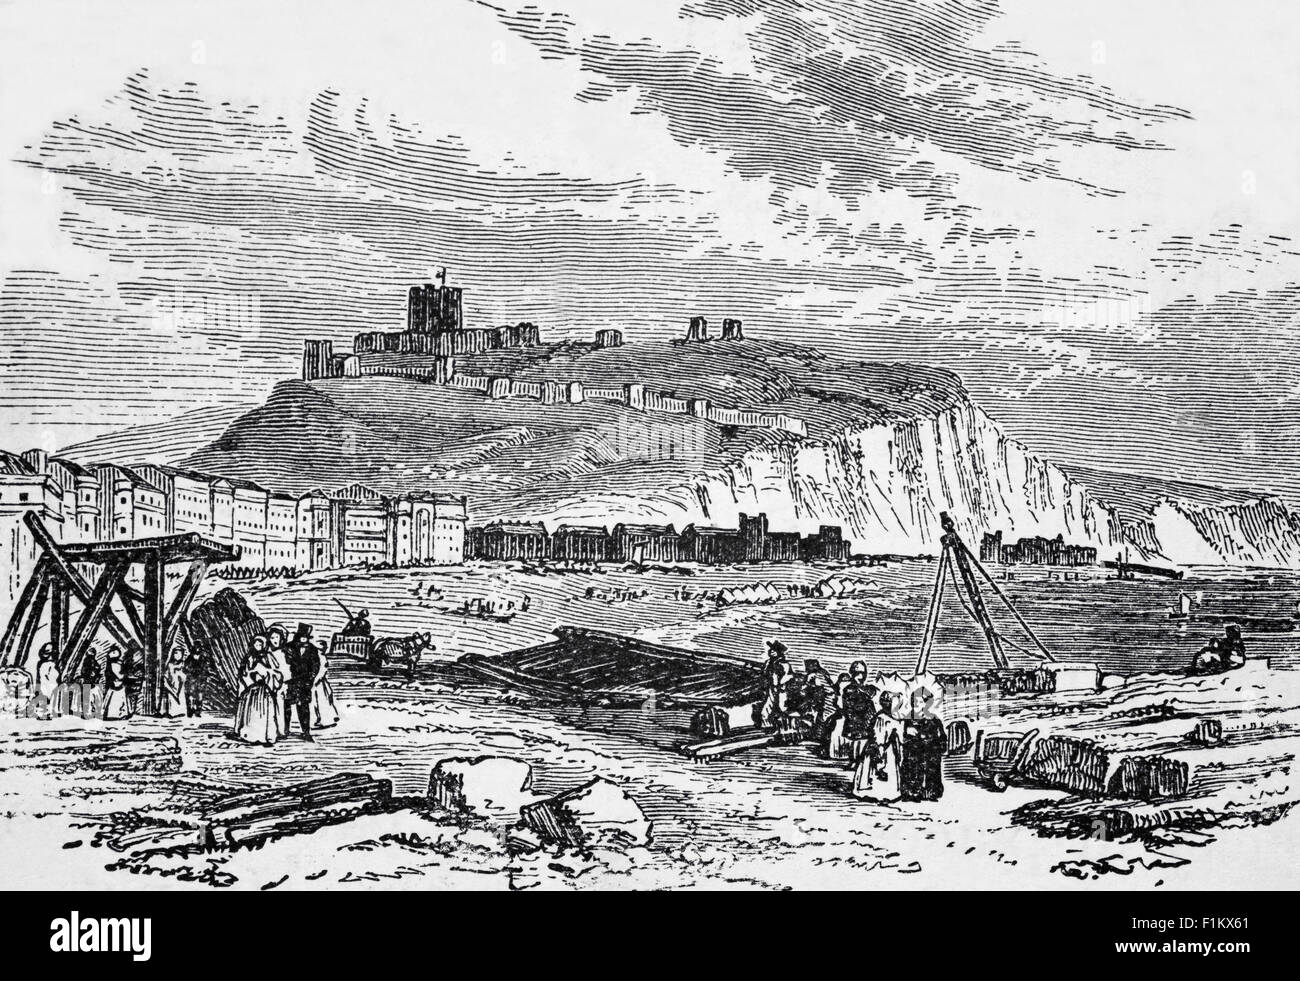 A 19th Century view of Dover, a town and major ferry port in Kent, South East England. It faces France across the Strait of Dover, the narrowest part of the English Channel at 21 miles from Cap Gris Nez in France. The surrounding chalk cliffs are known as the White Cliffs of Dover. Stock Photo